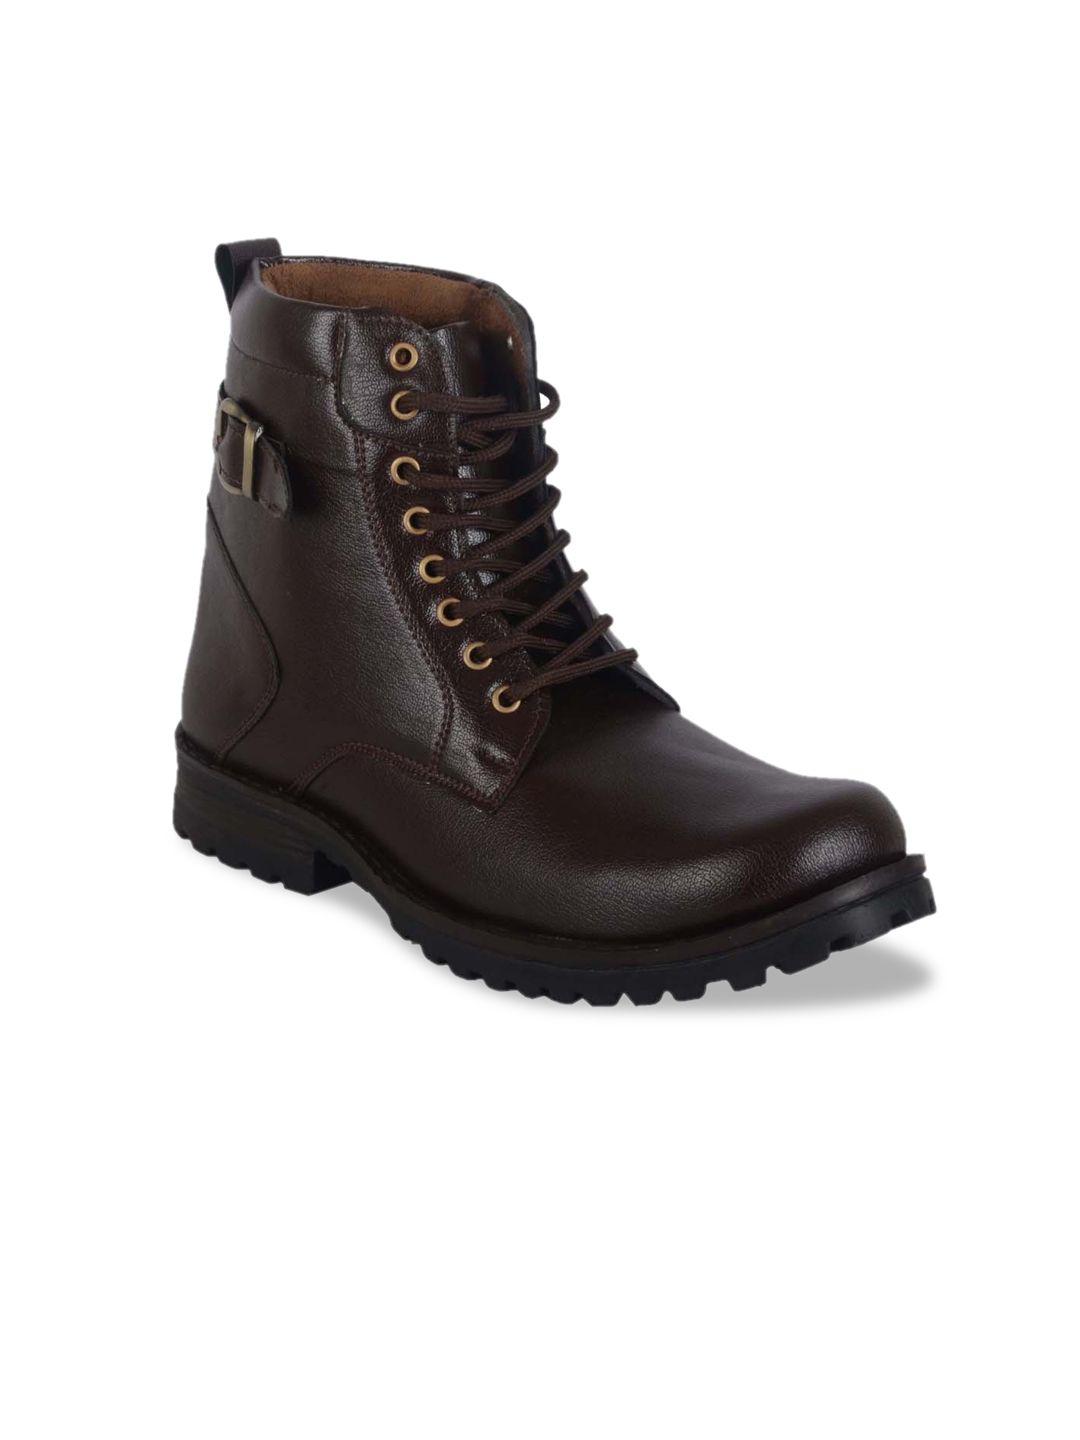 woakers men brown solid synthetic high-top flat boots